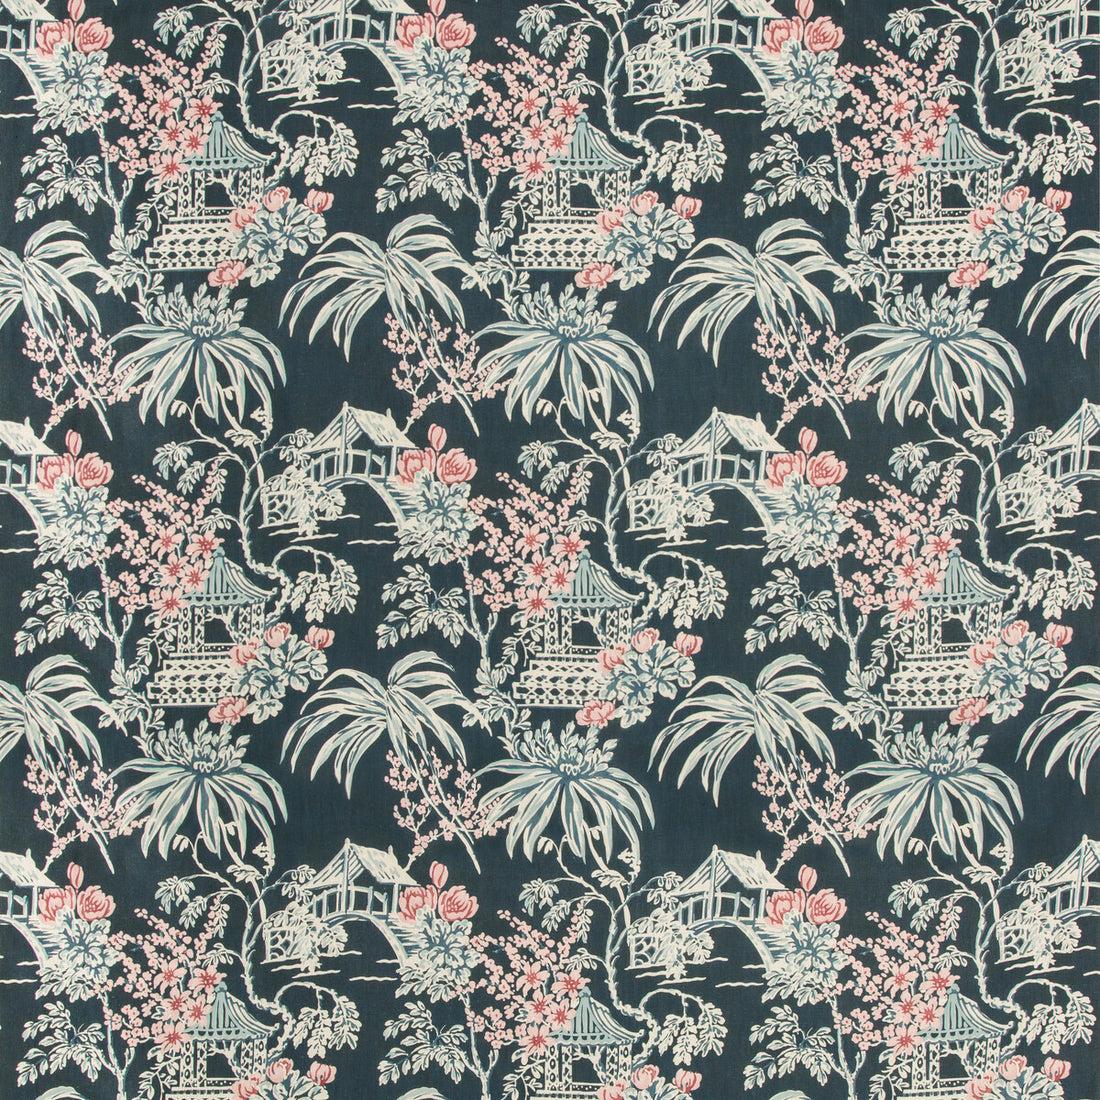 Tongli Print fabric in midnight color - pattern 8019138.557.0 - by Brunschwig &amp; Fils in the Summer Palace collection